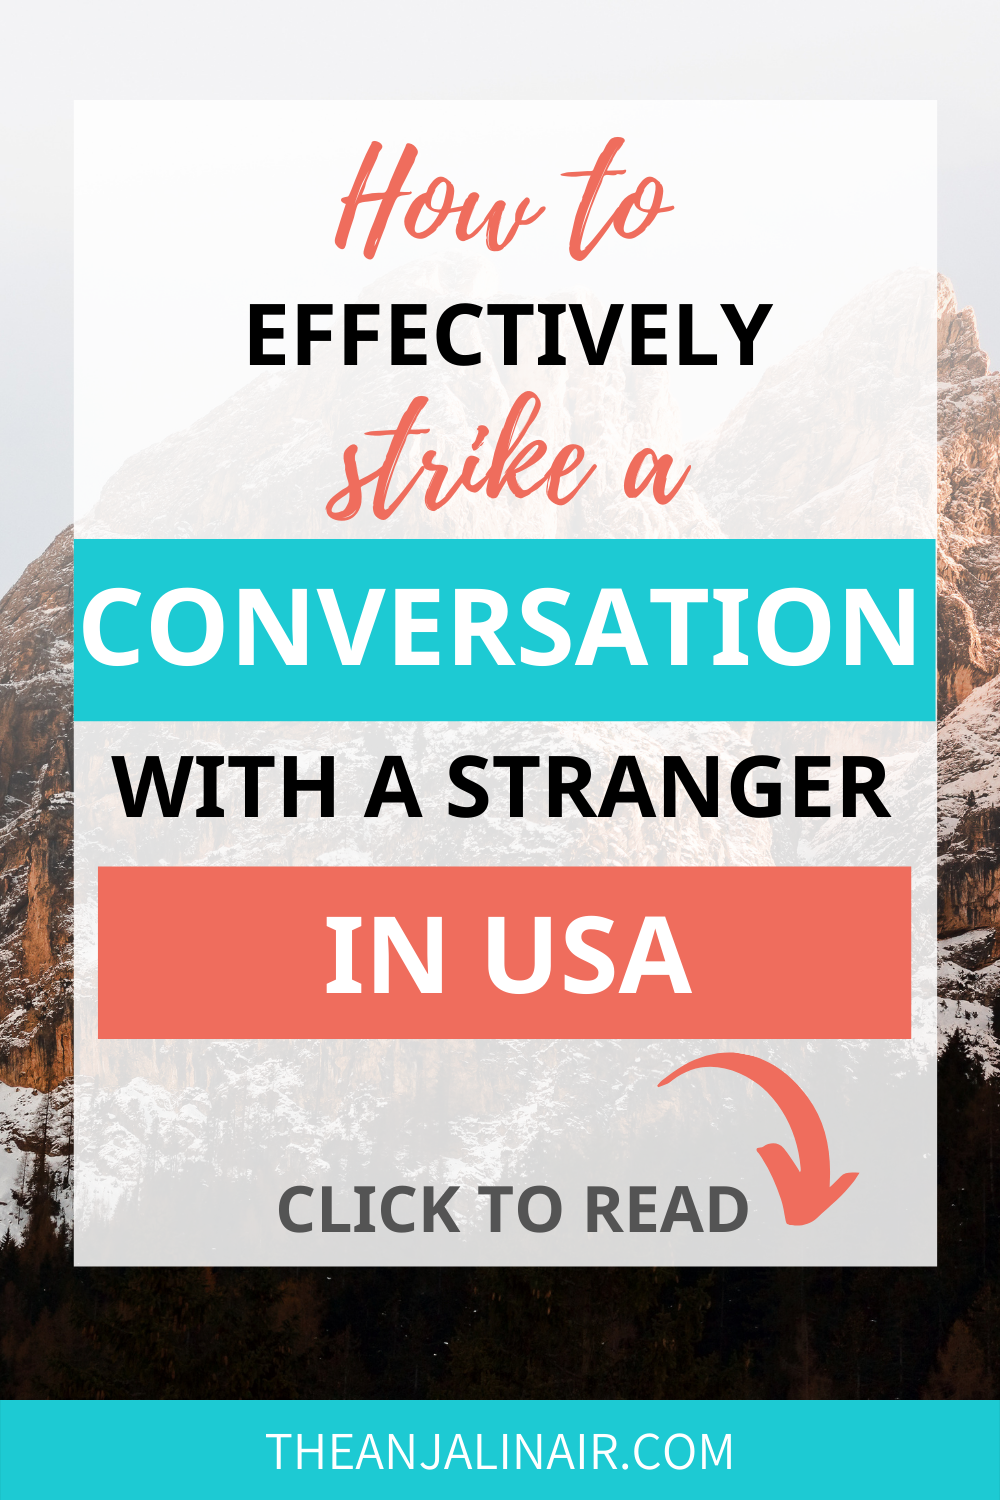 How to talk to a stranger in USA